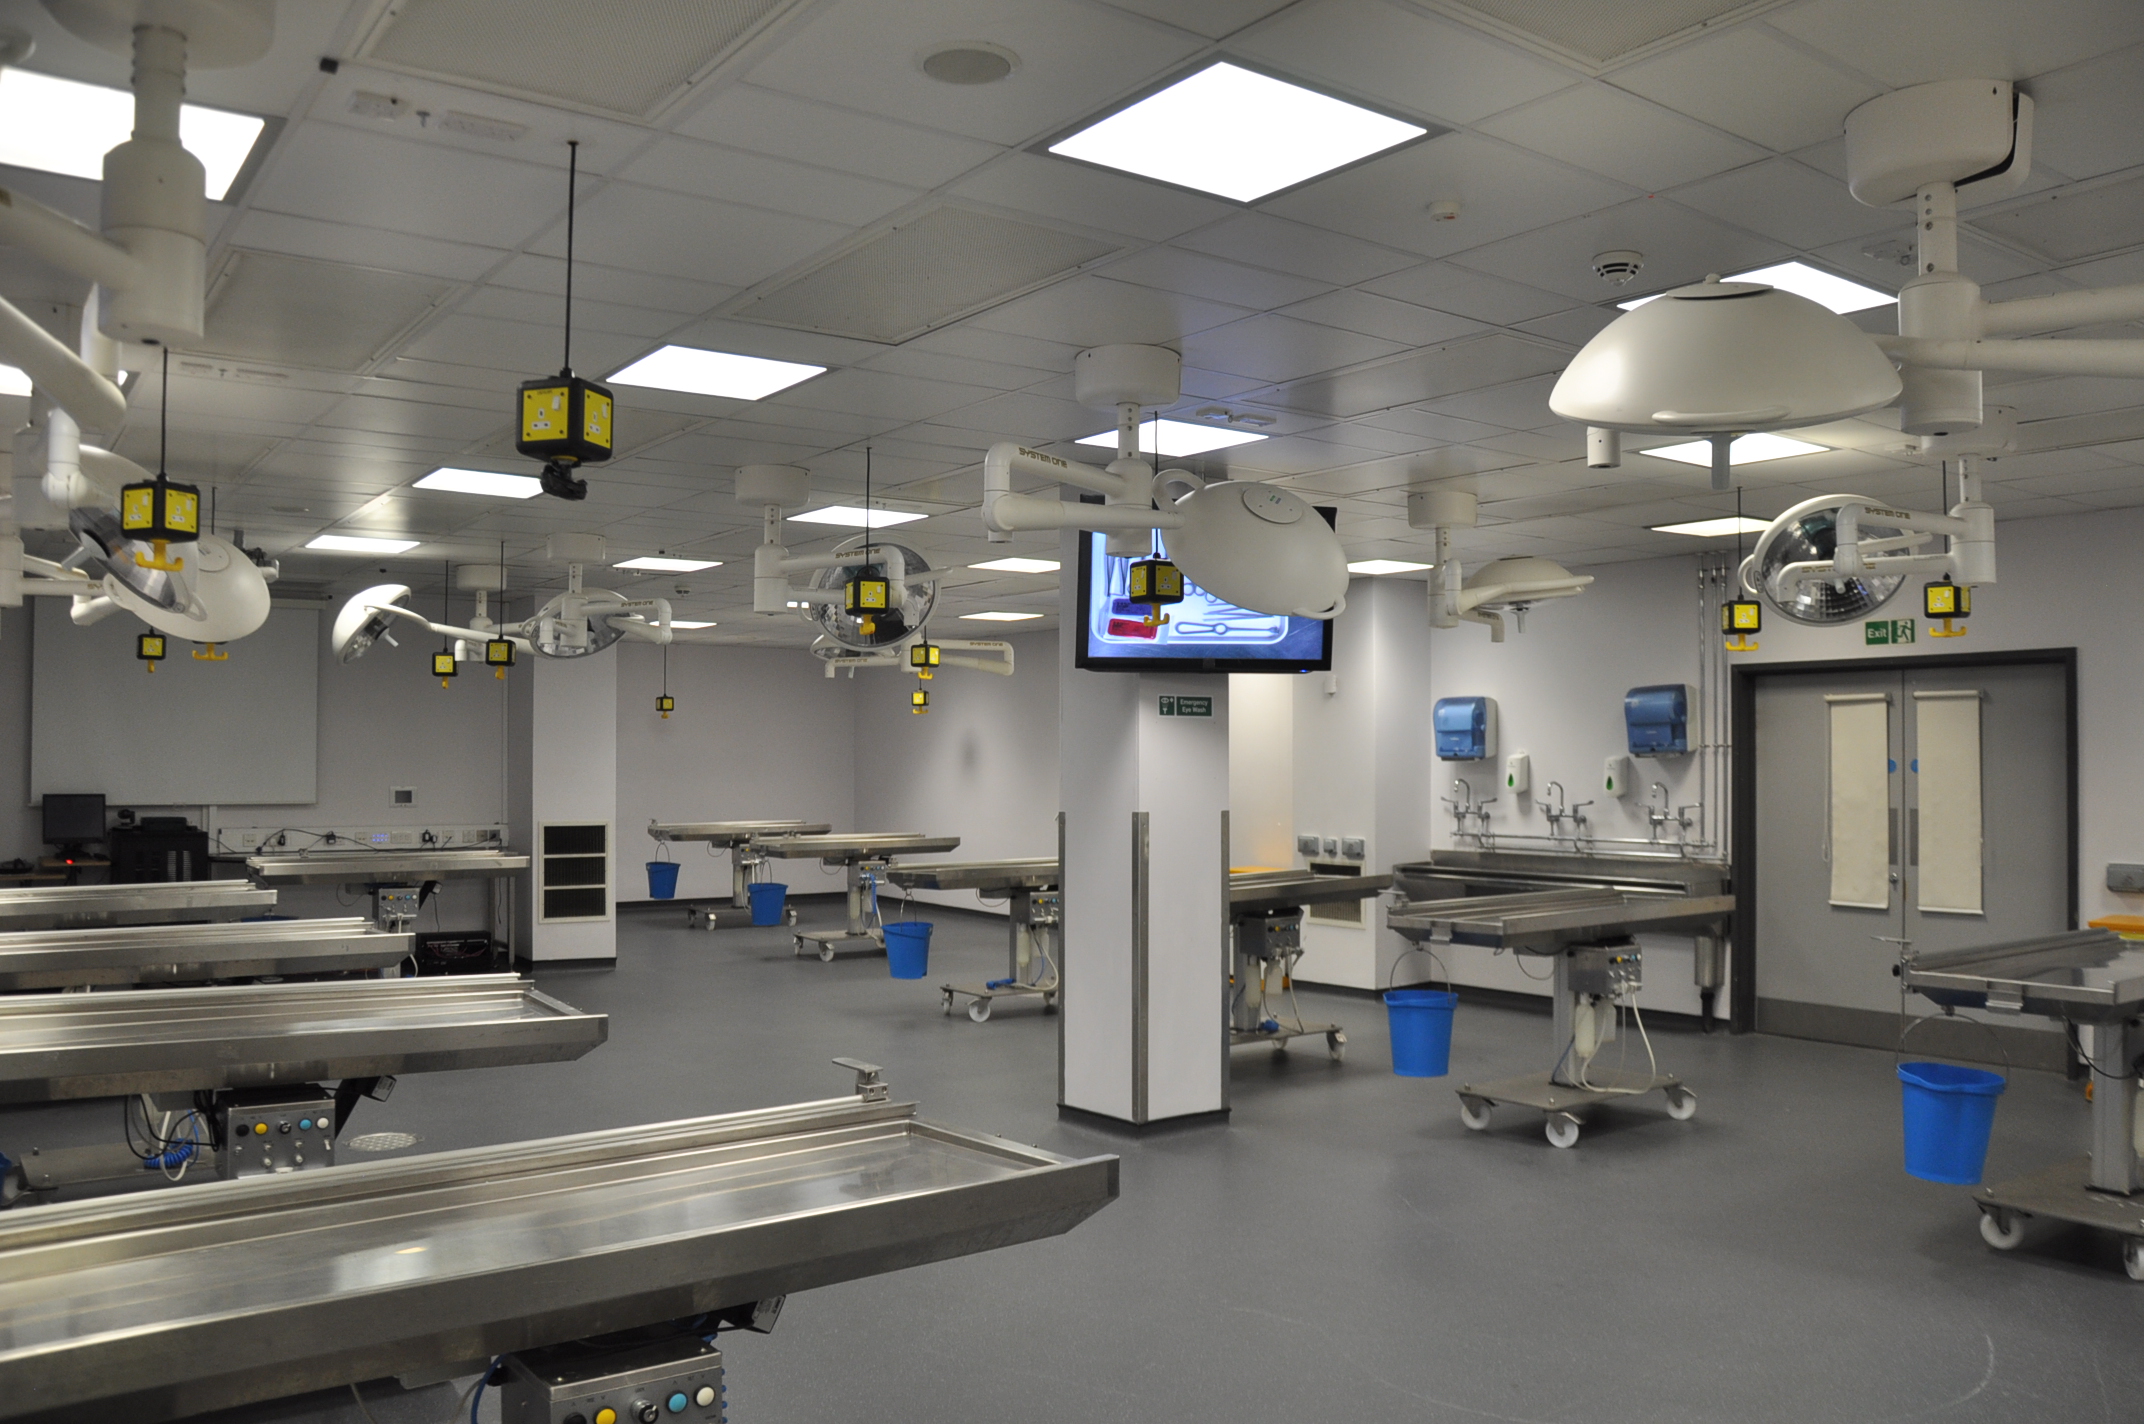 The Vesalius dissection room, a large empty lab set up with stainless steel dissection and specialist operating theatre lighting.